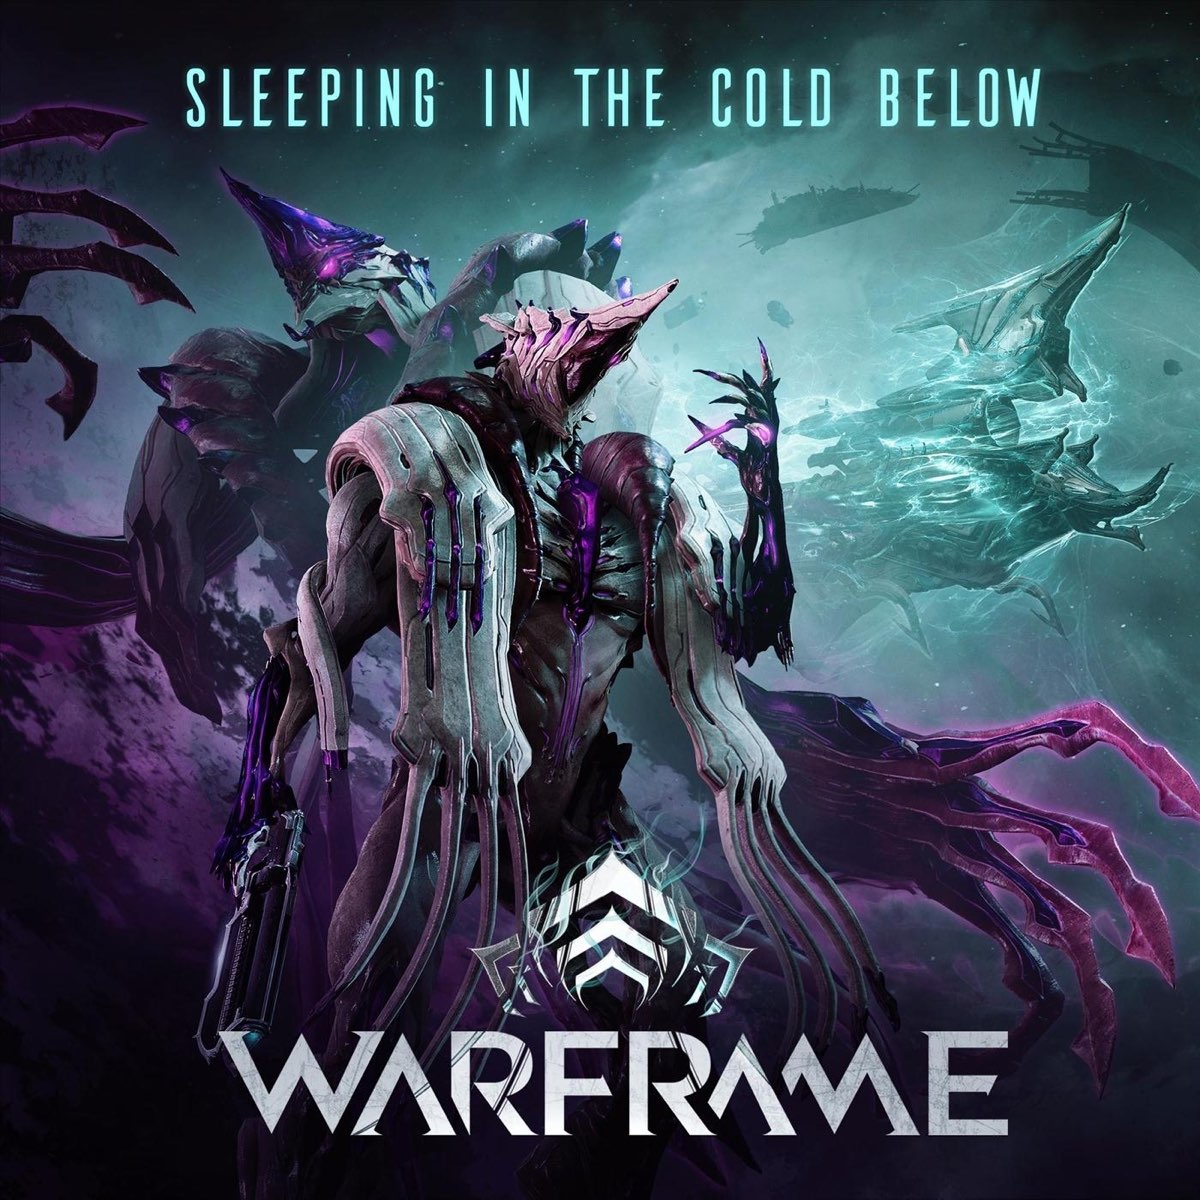 Sleeping in the cold below from warframe перевод